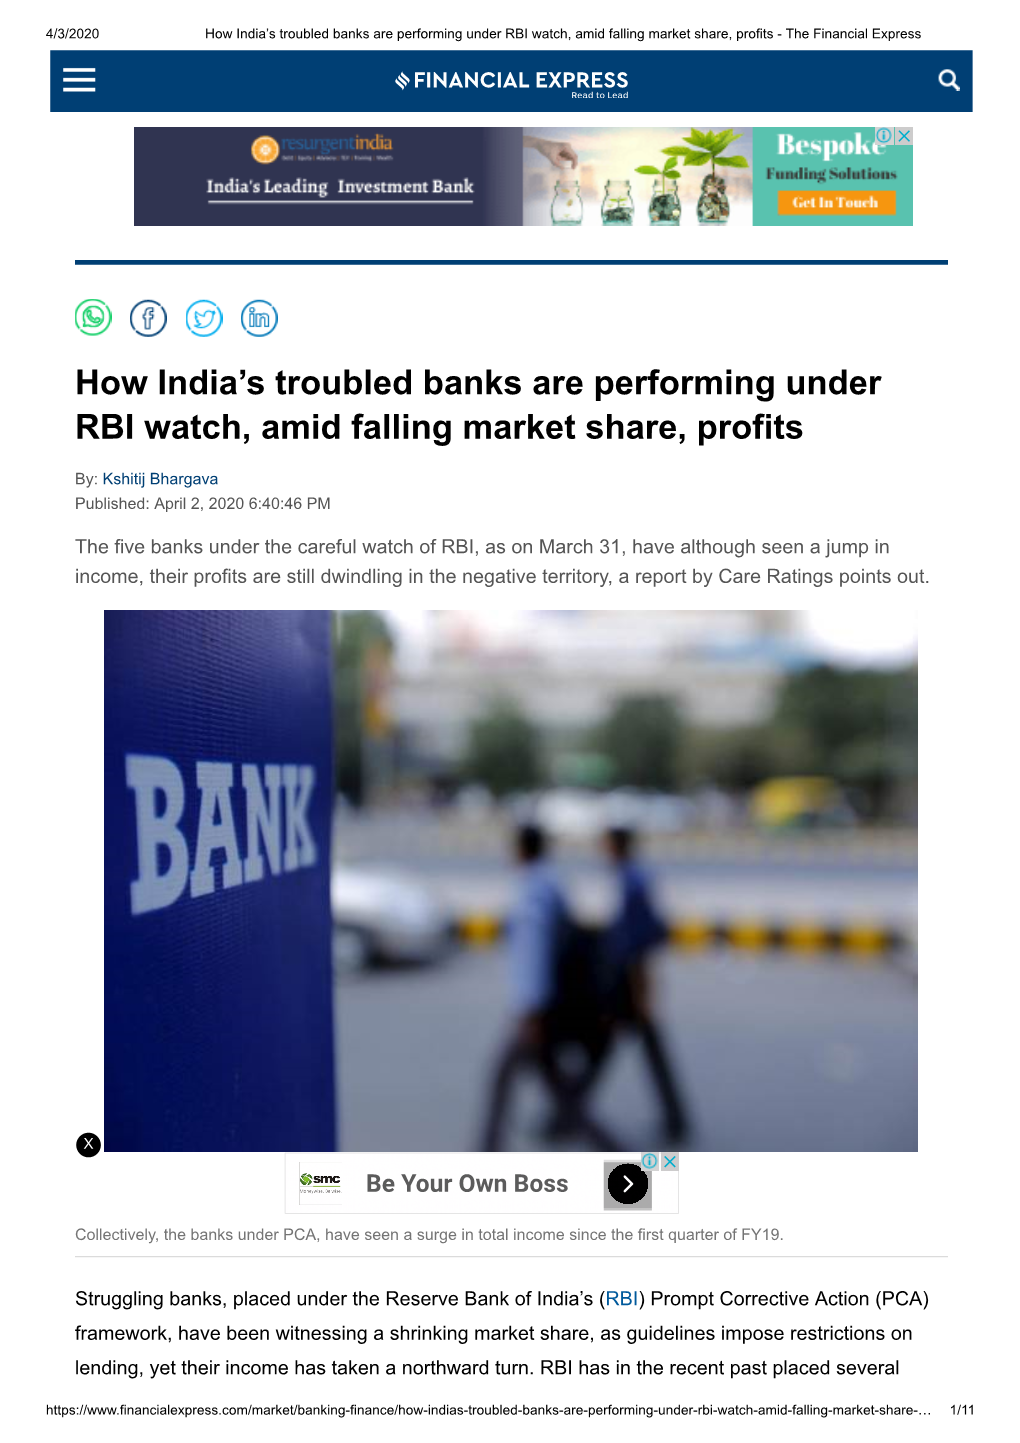 How India's Troubled Banks Are Performing Under RBI Watch, Amid